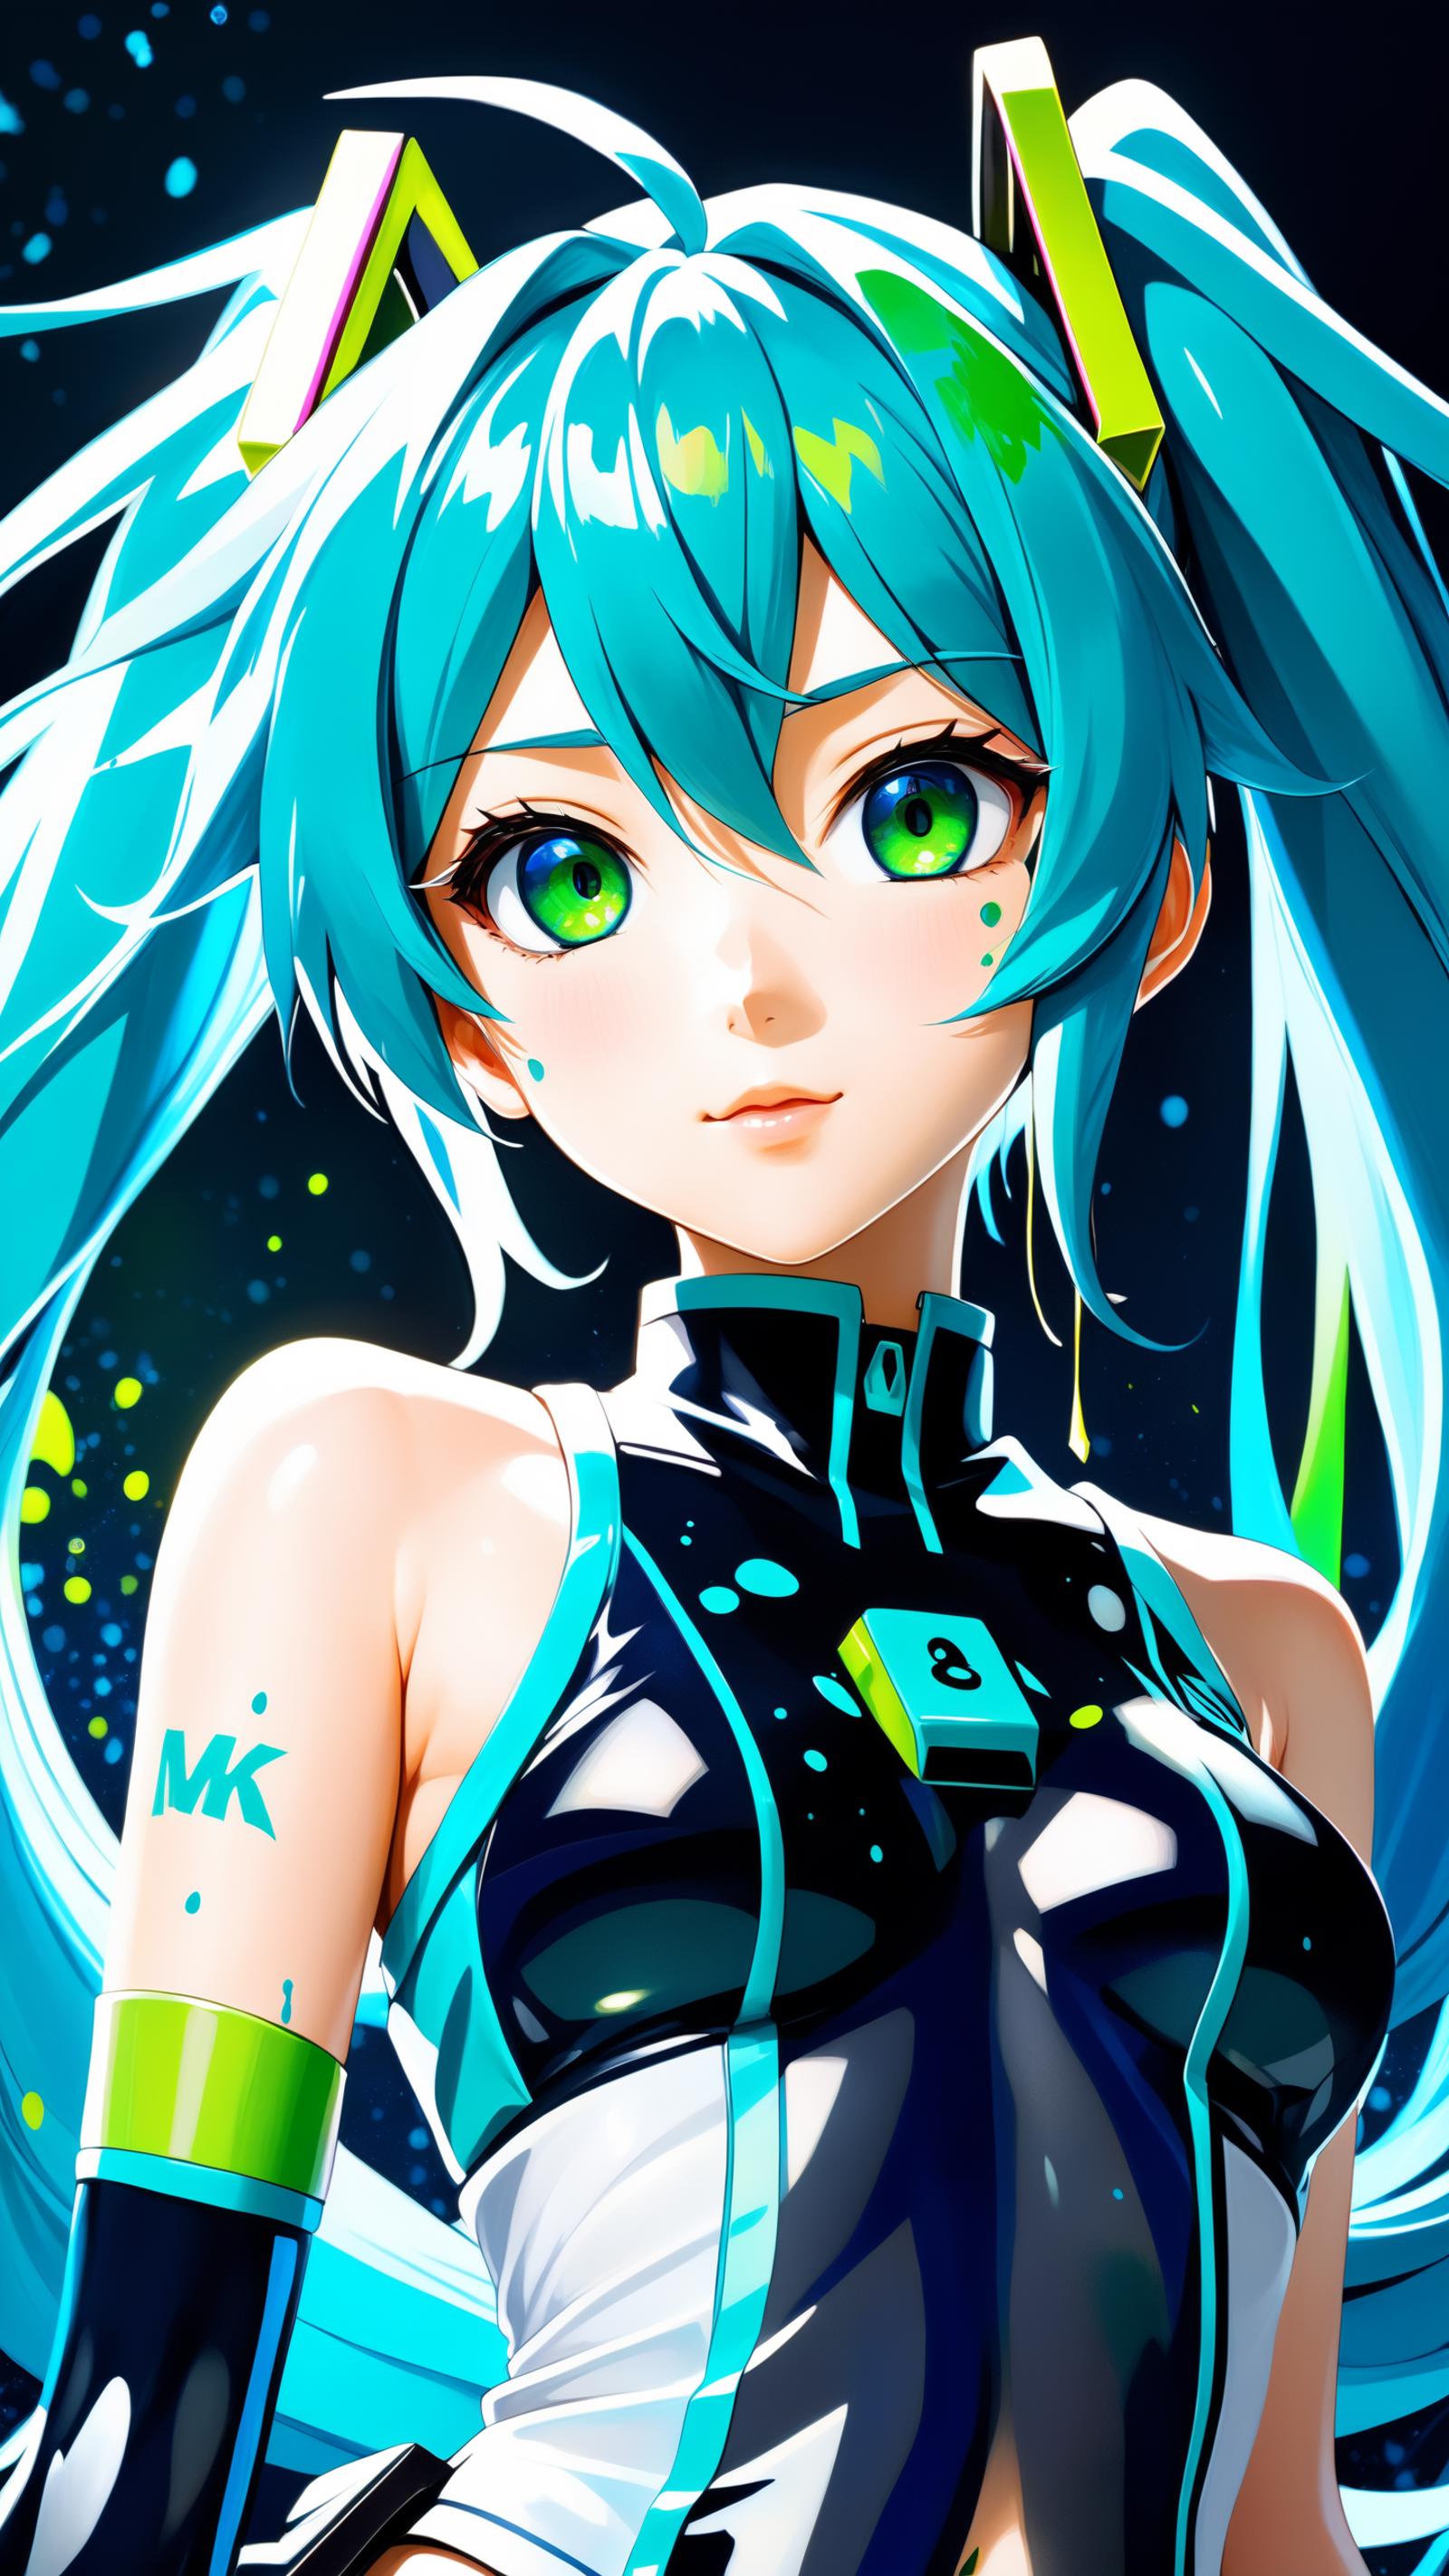 A blue-haired anime character with green eyes and a unique outfit.